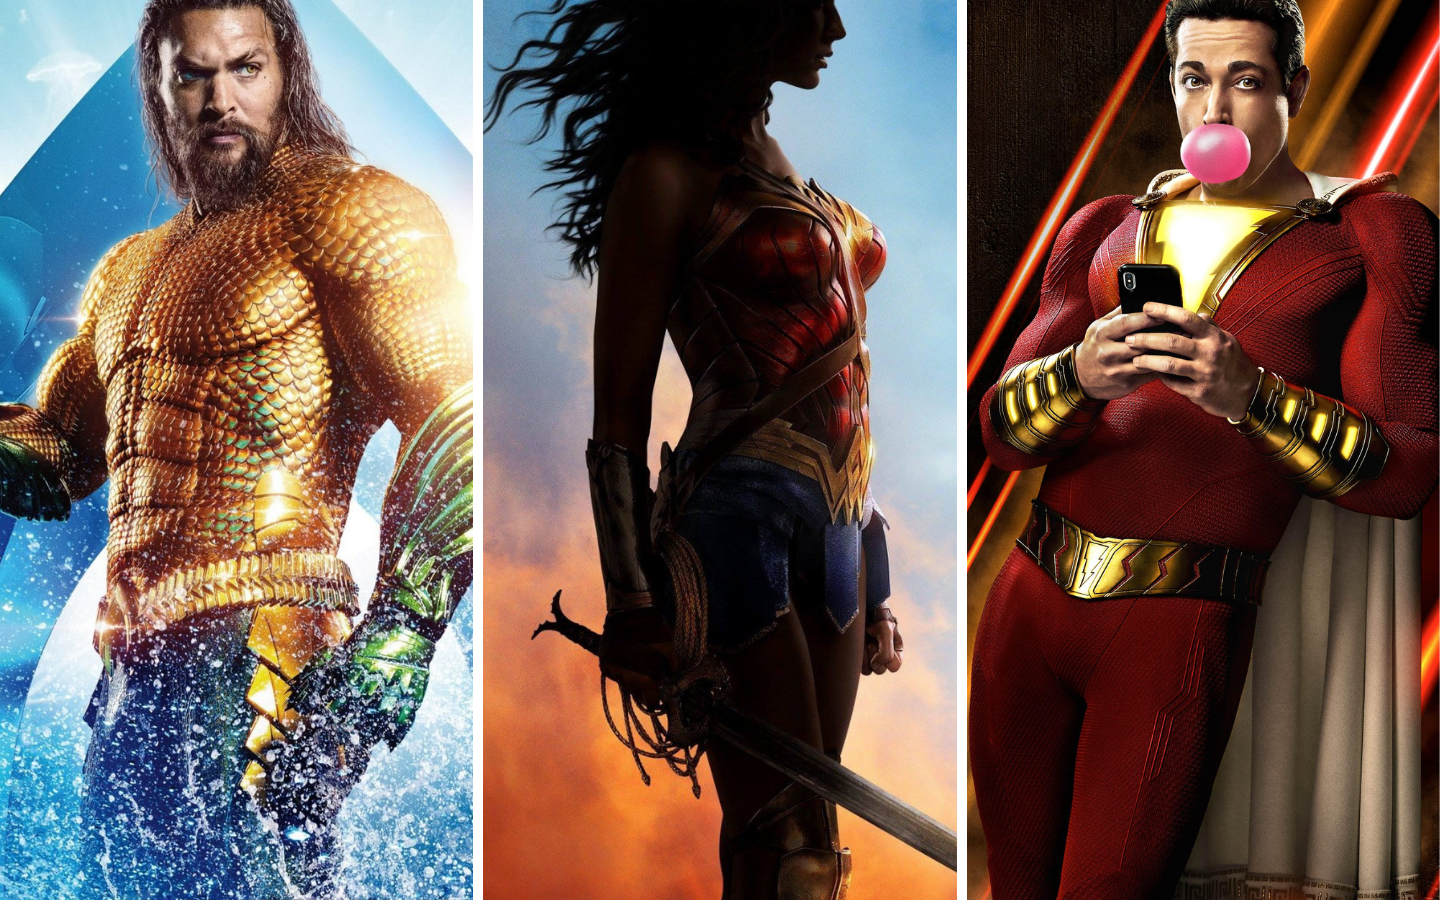 Get Ready for DC FanDome With These Various DC Films and Series Available on HBO Max